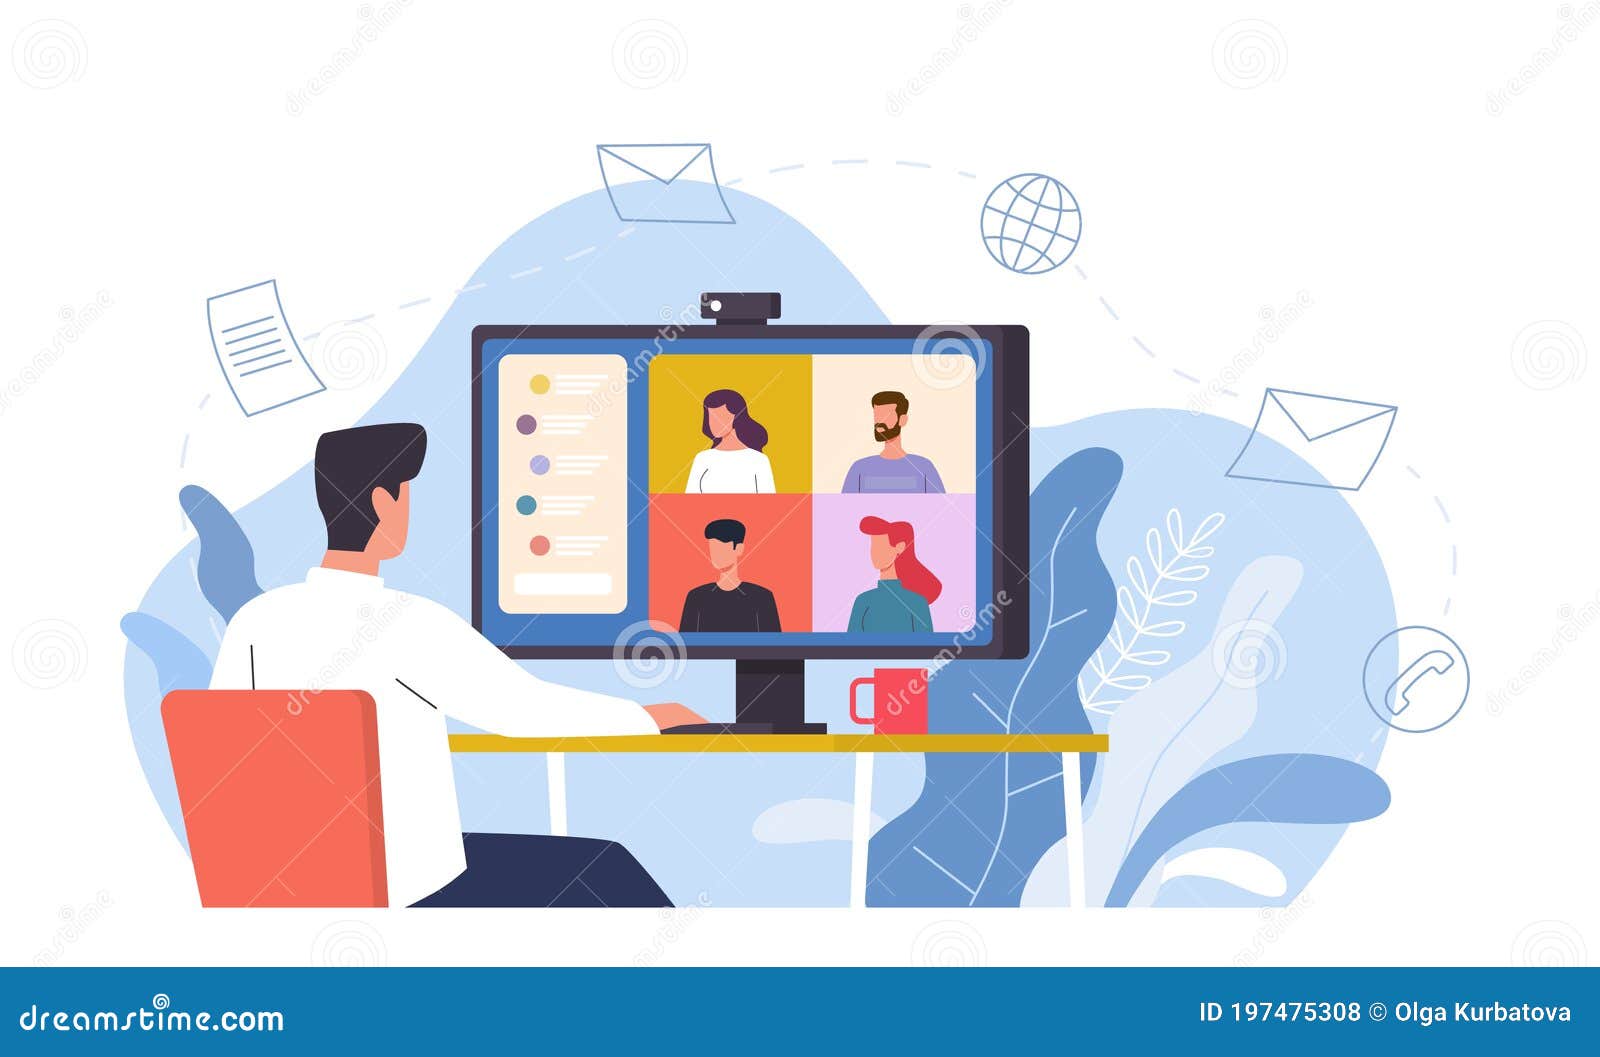 video conference. man at desk provides collective virtual meeting using computer, online chat remote work with video